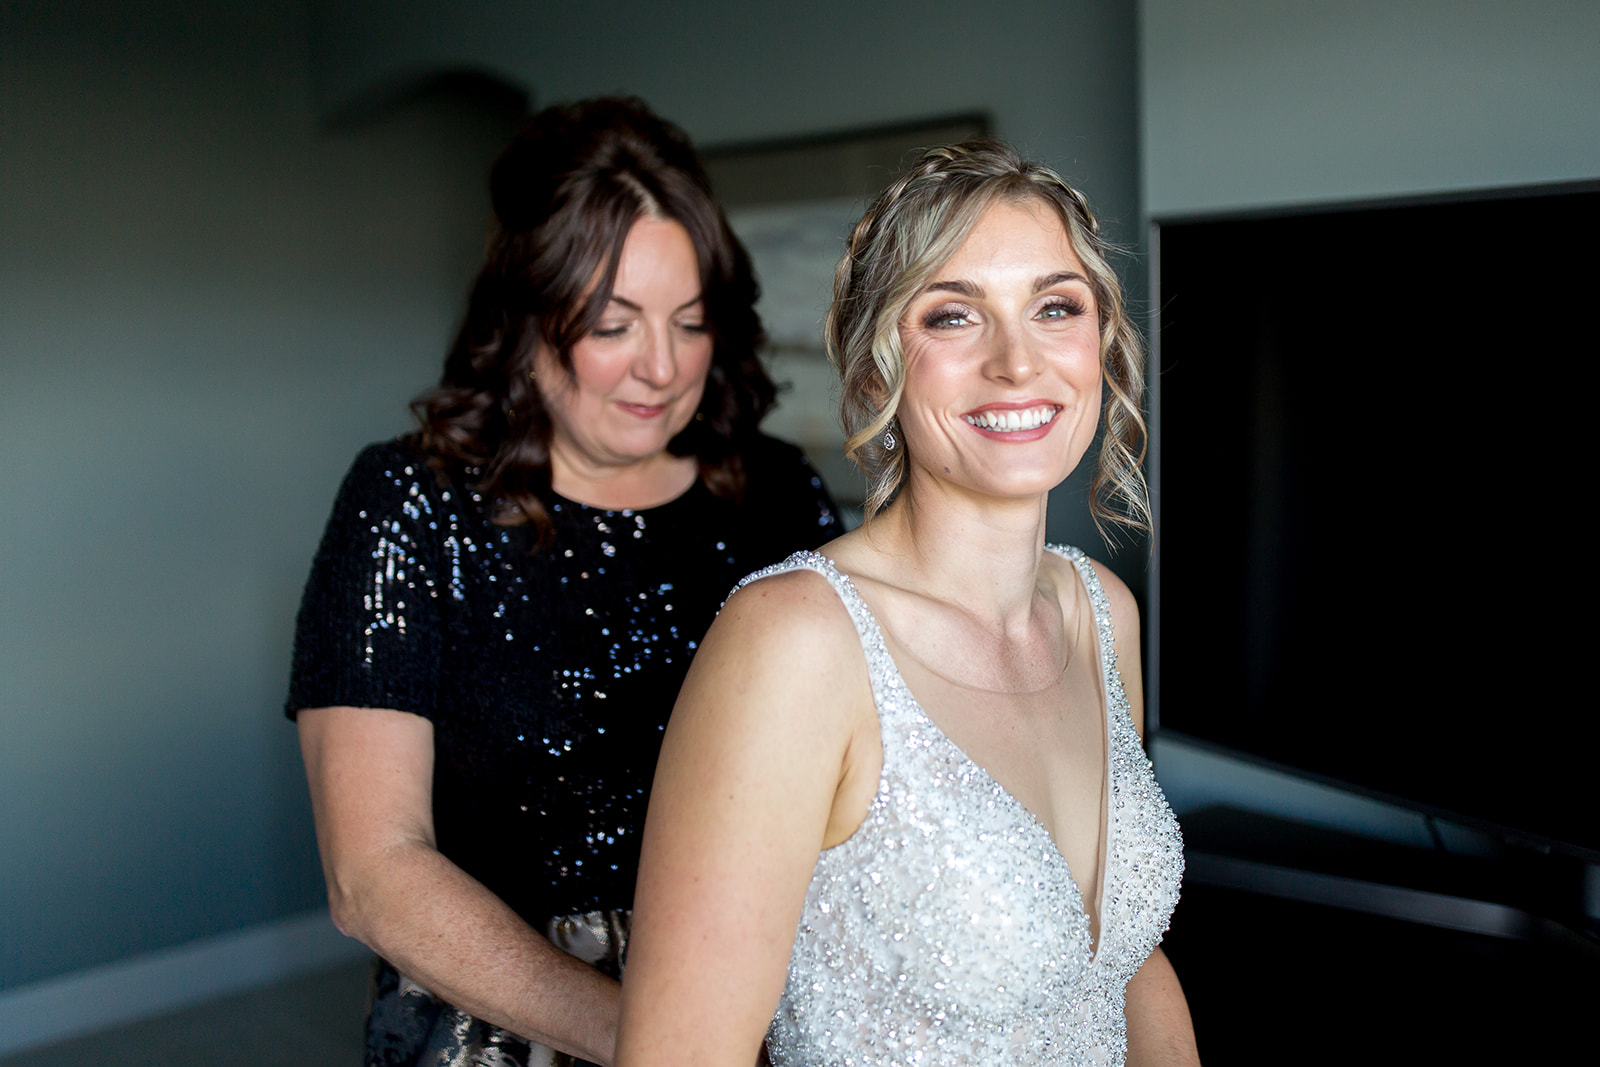 Bride smiles into the lens of the camera as her wedding photographer captures her being zipped into her dress on her wedding day